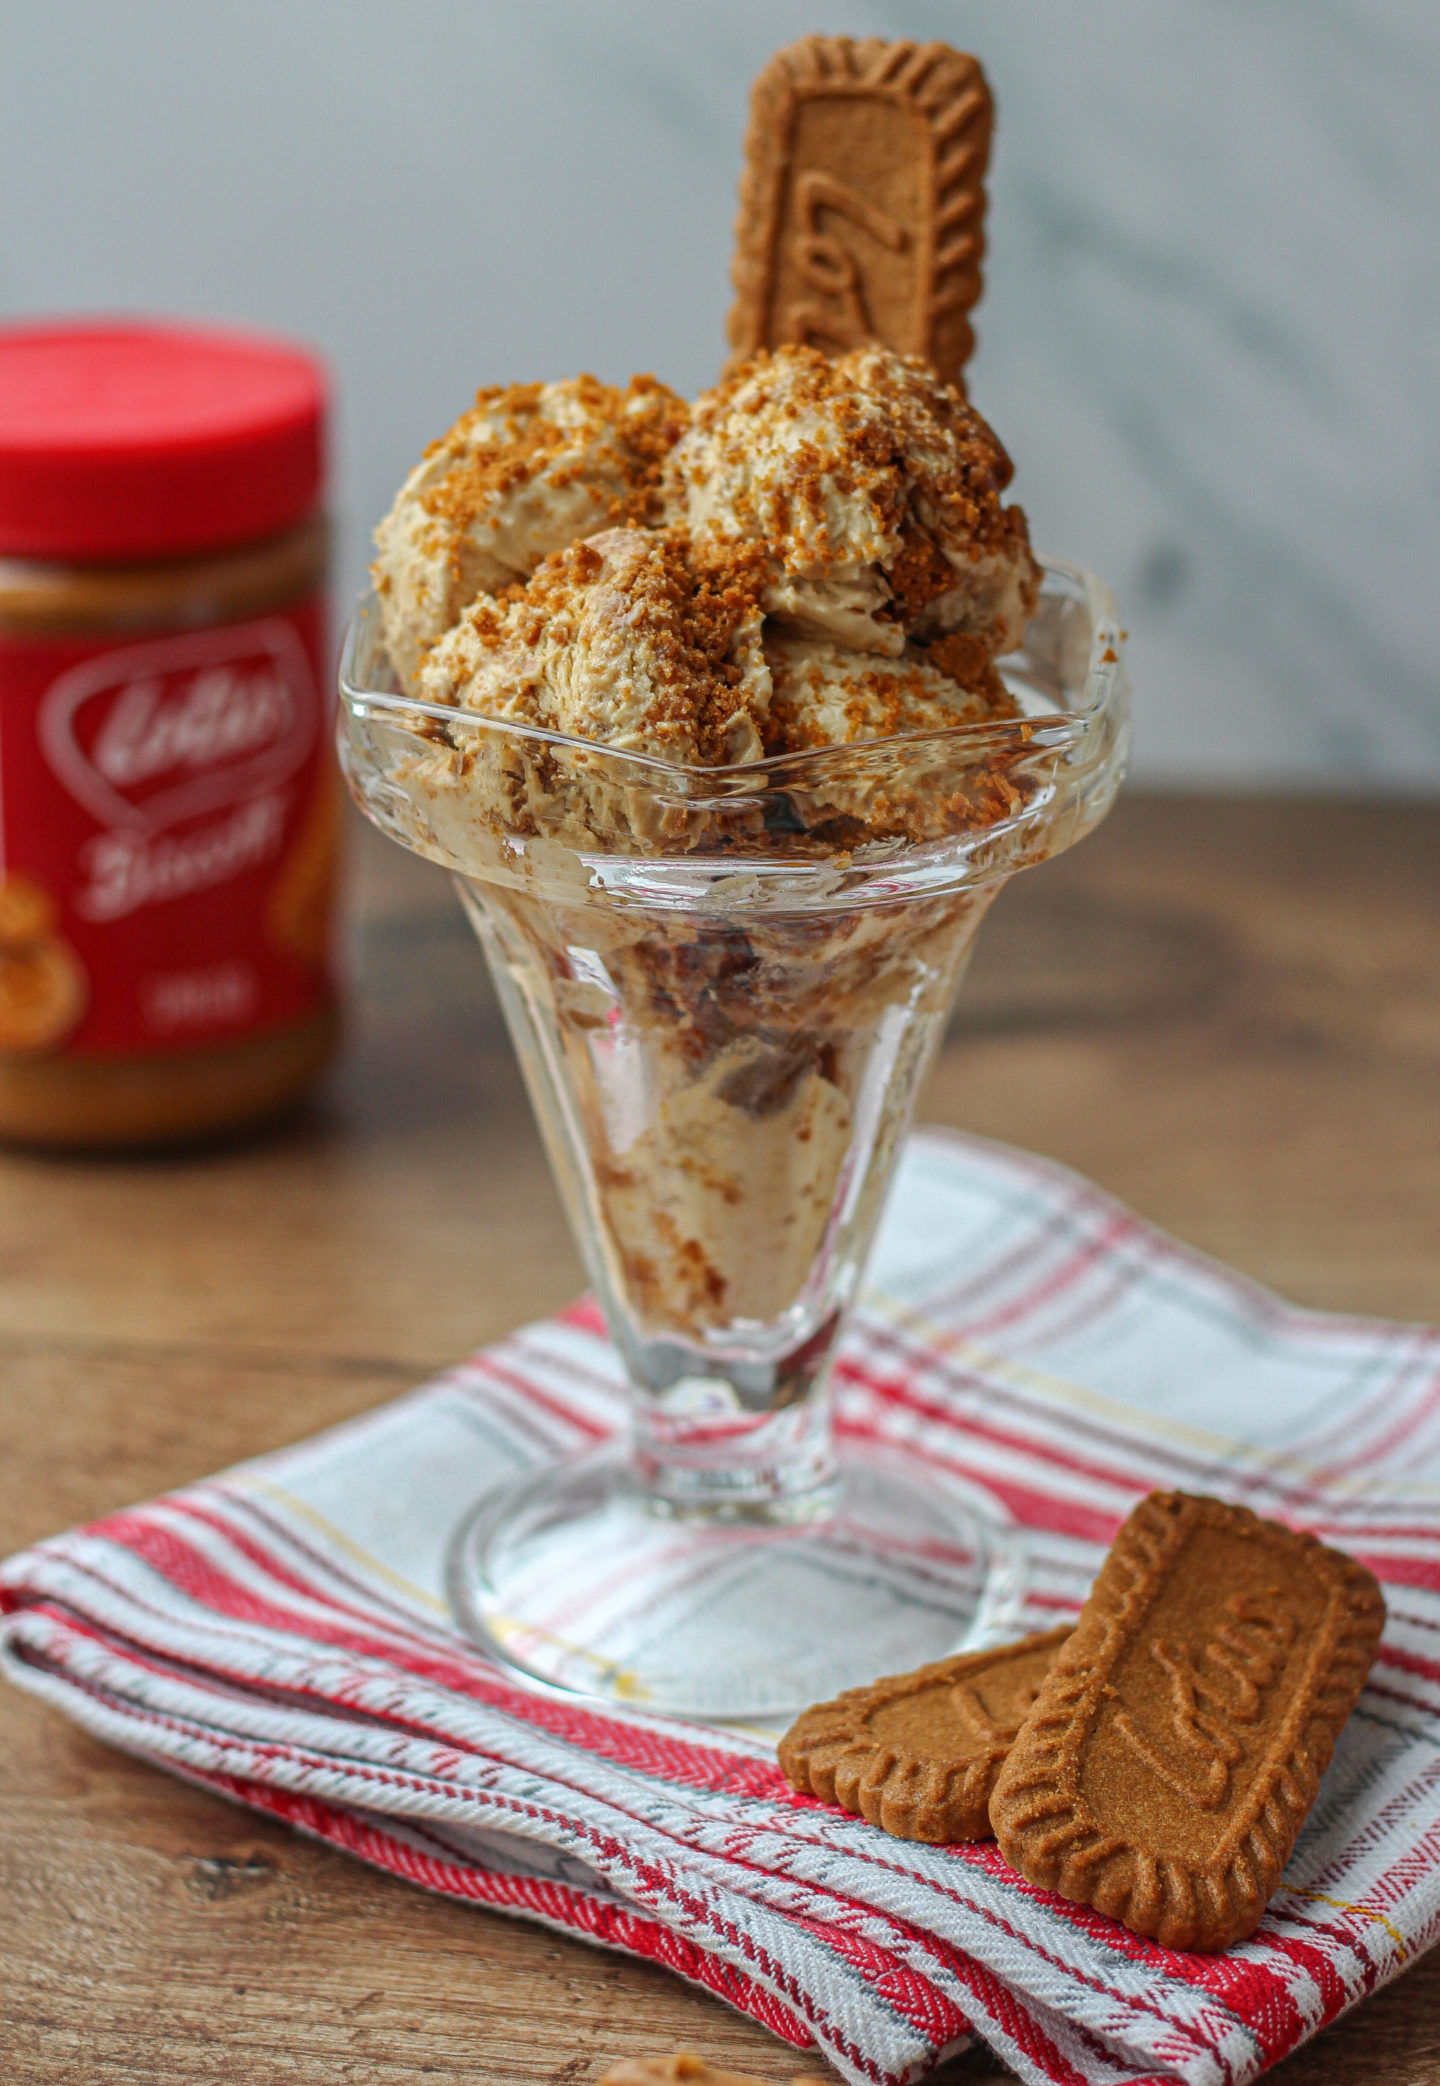 No-churn Biscoff ice cream sundae with Lotus Biscoff biscuits and spread 